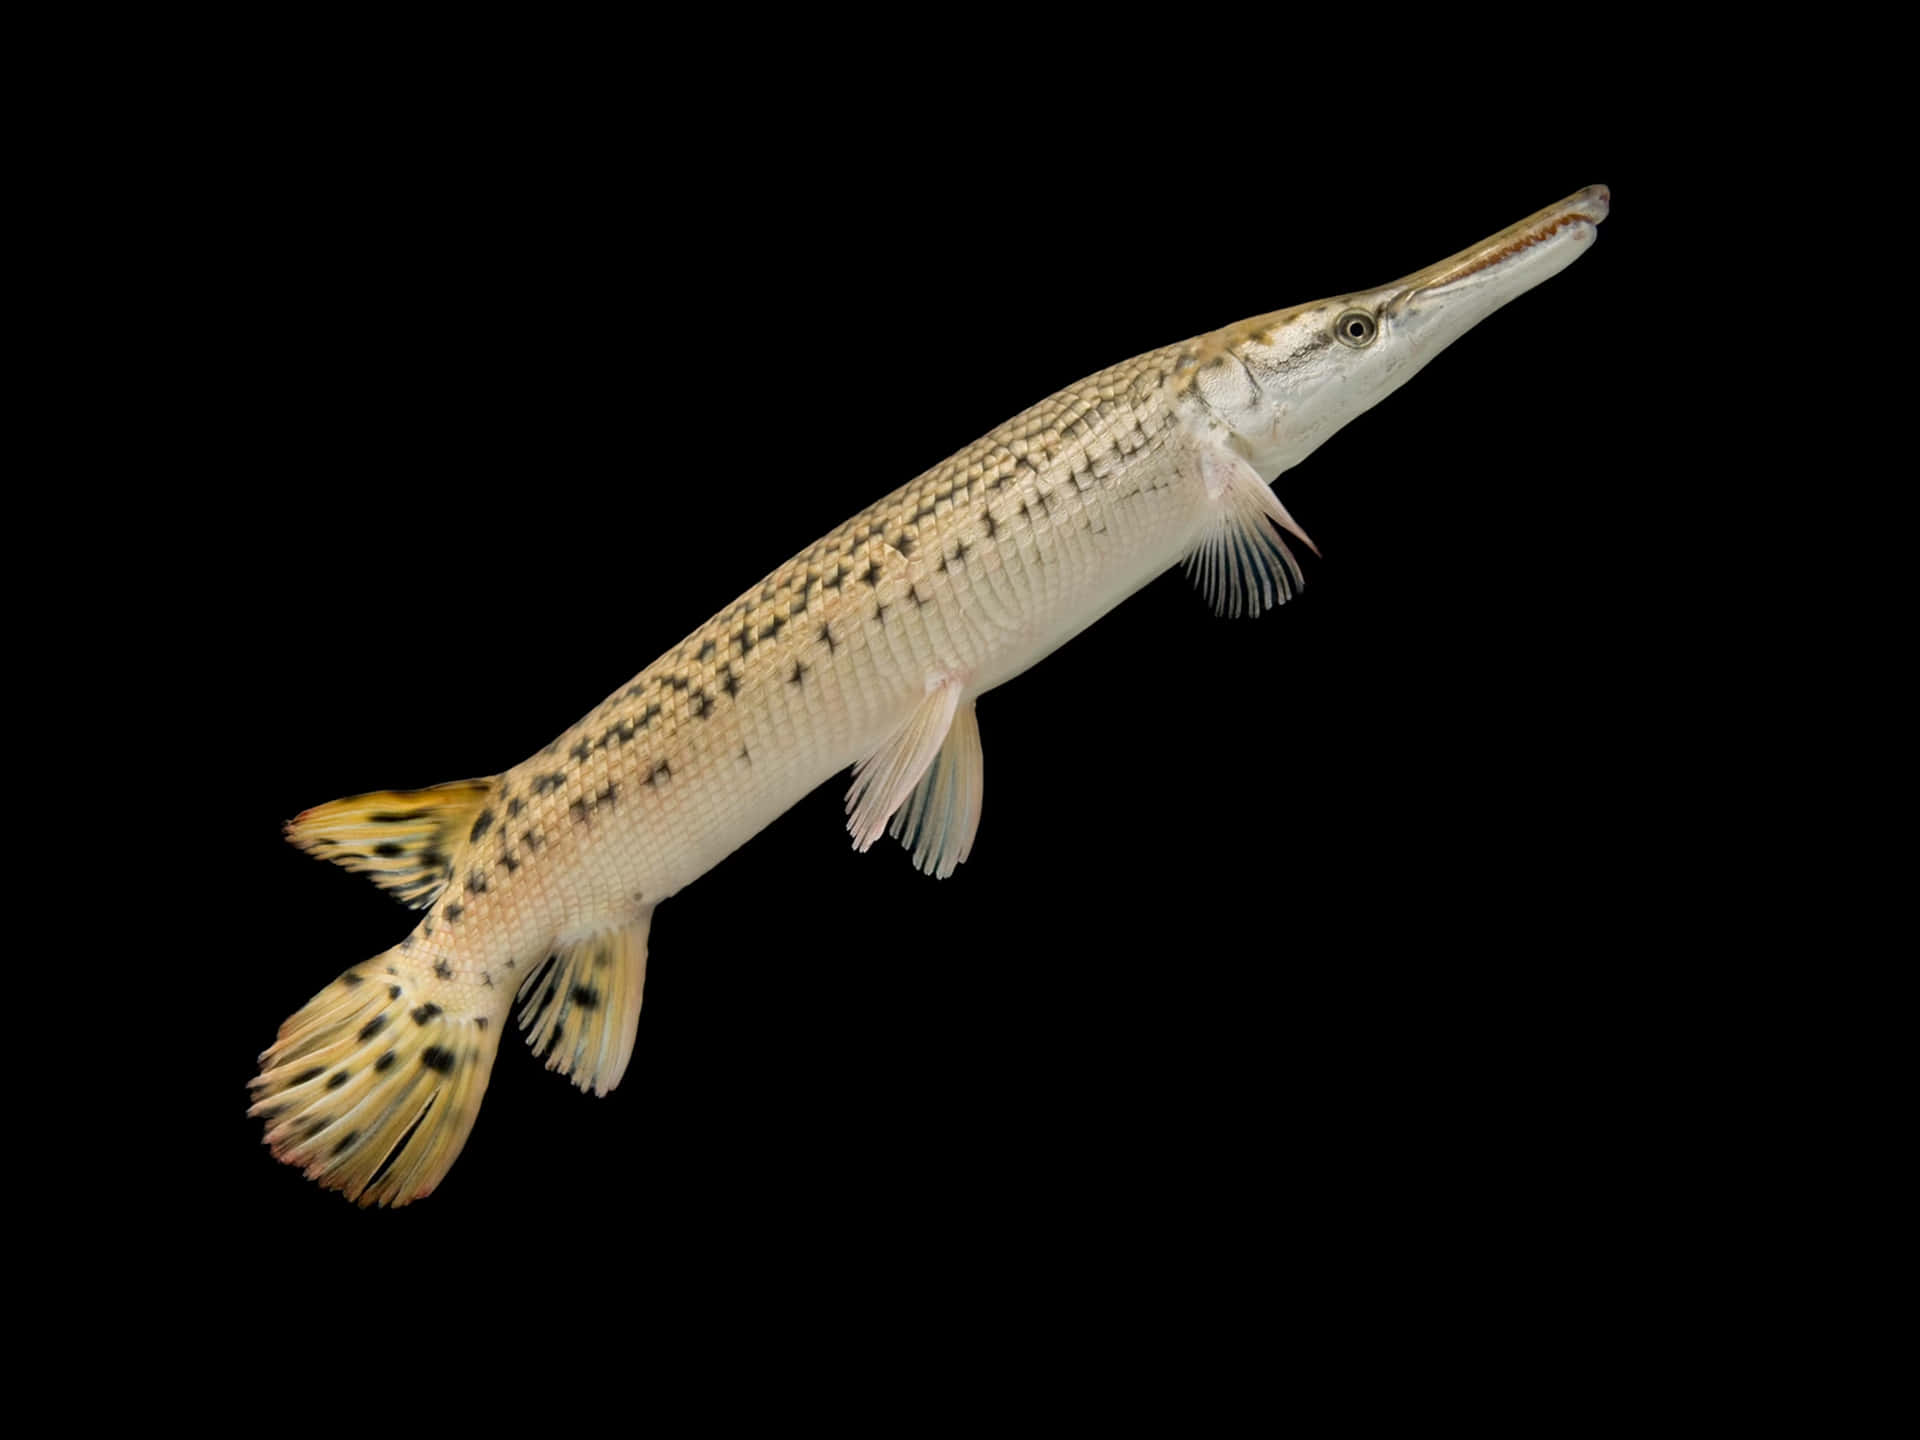 A Fish With A Long Tail And White Spots